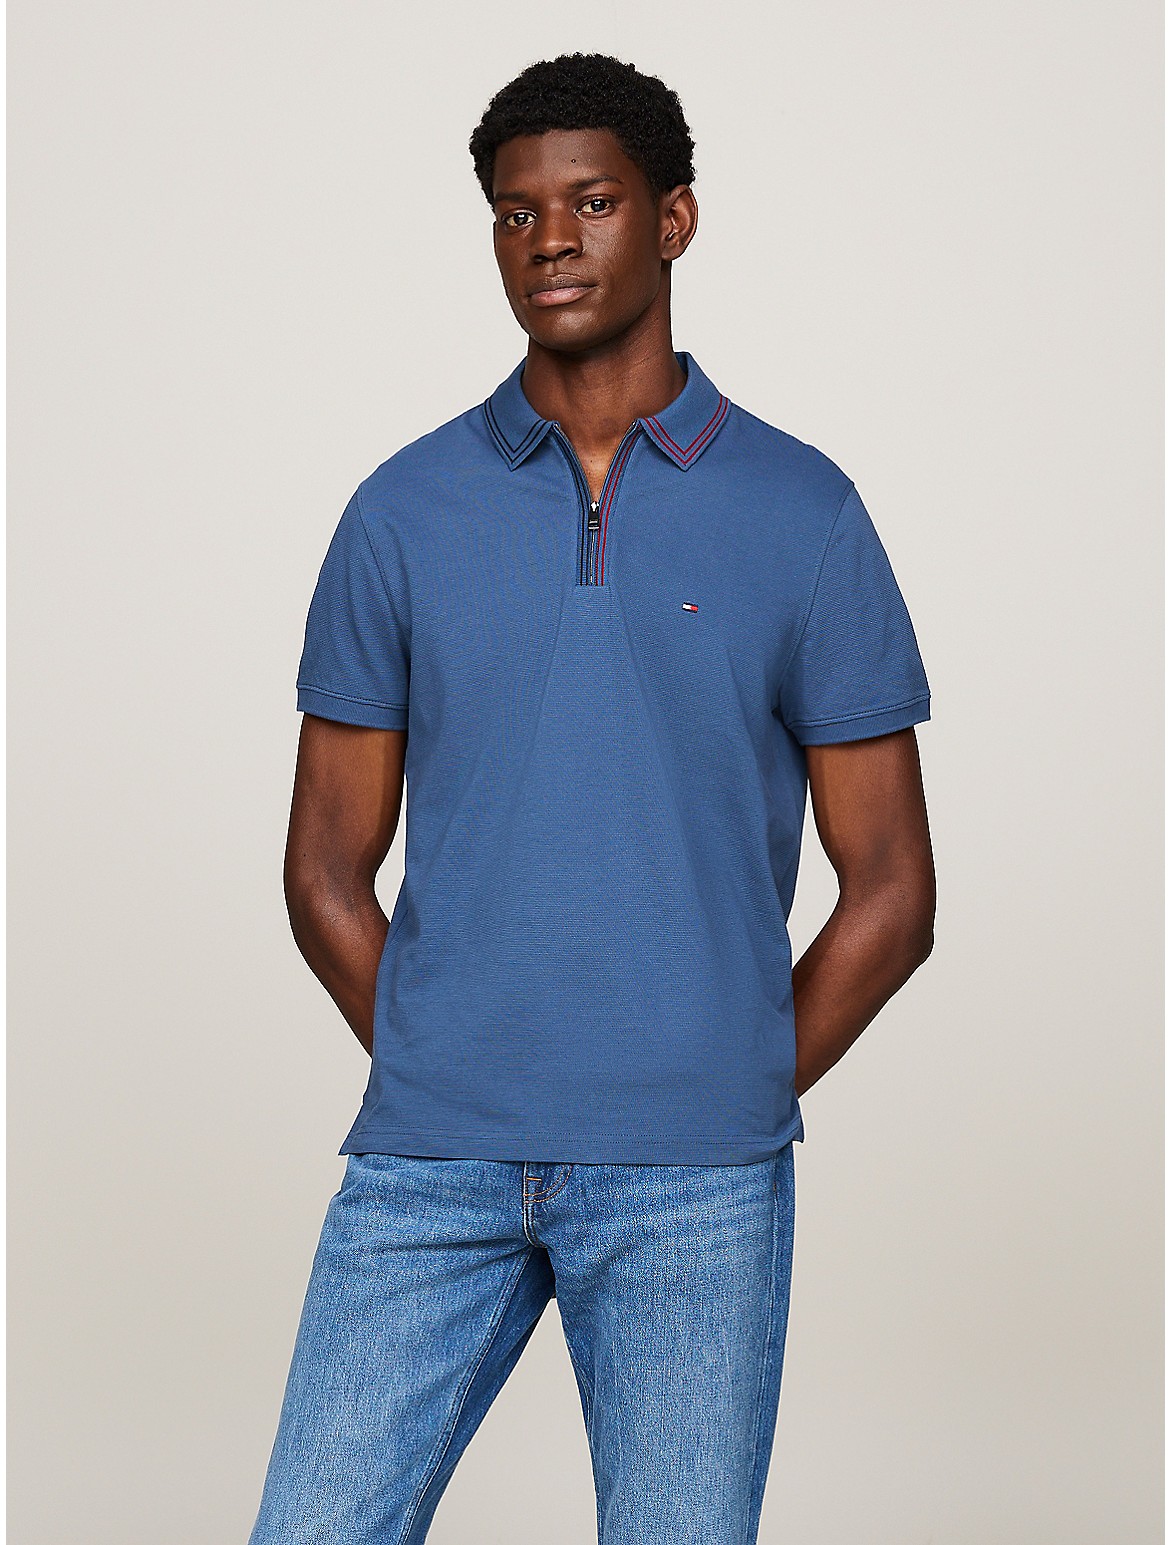 Tommy Hilfiger Men's Regular Fit Tipped Zip Polo